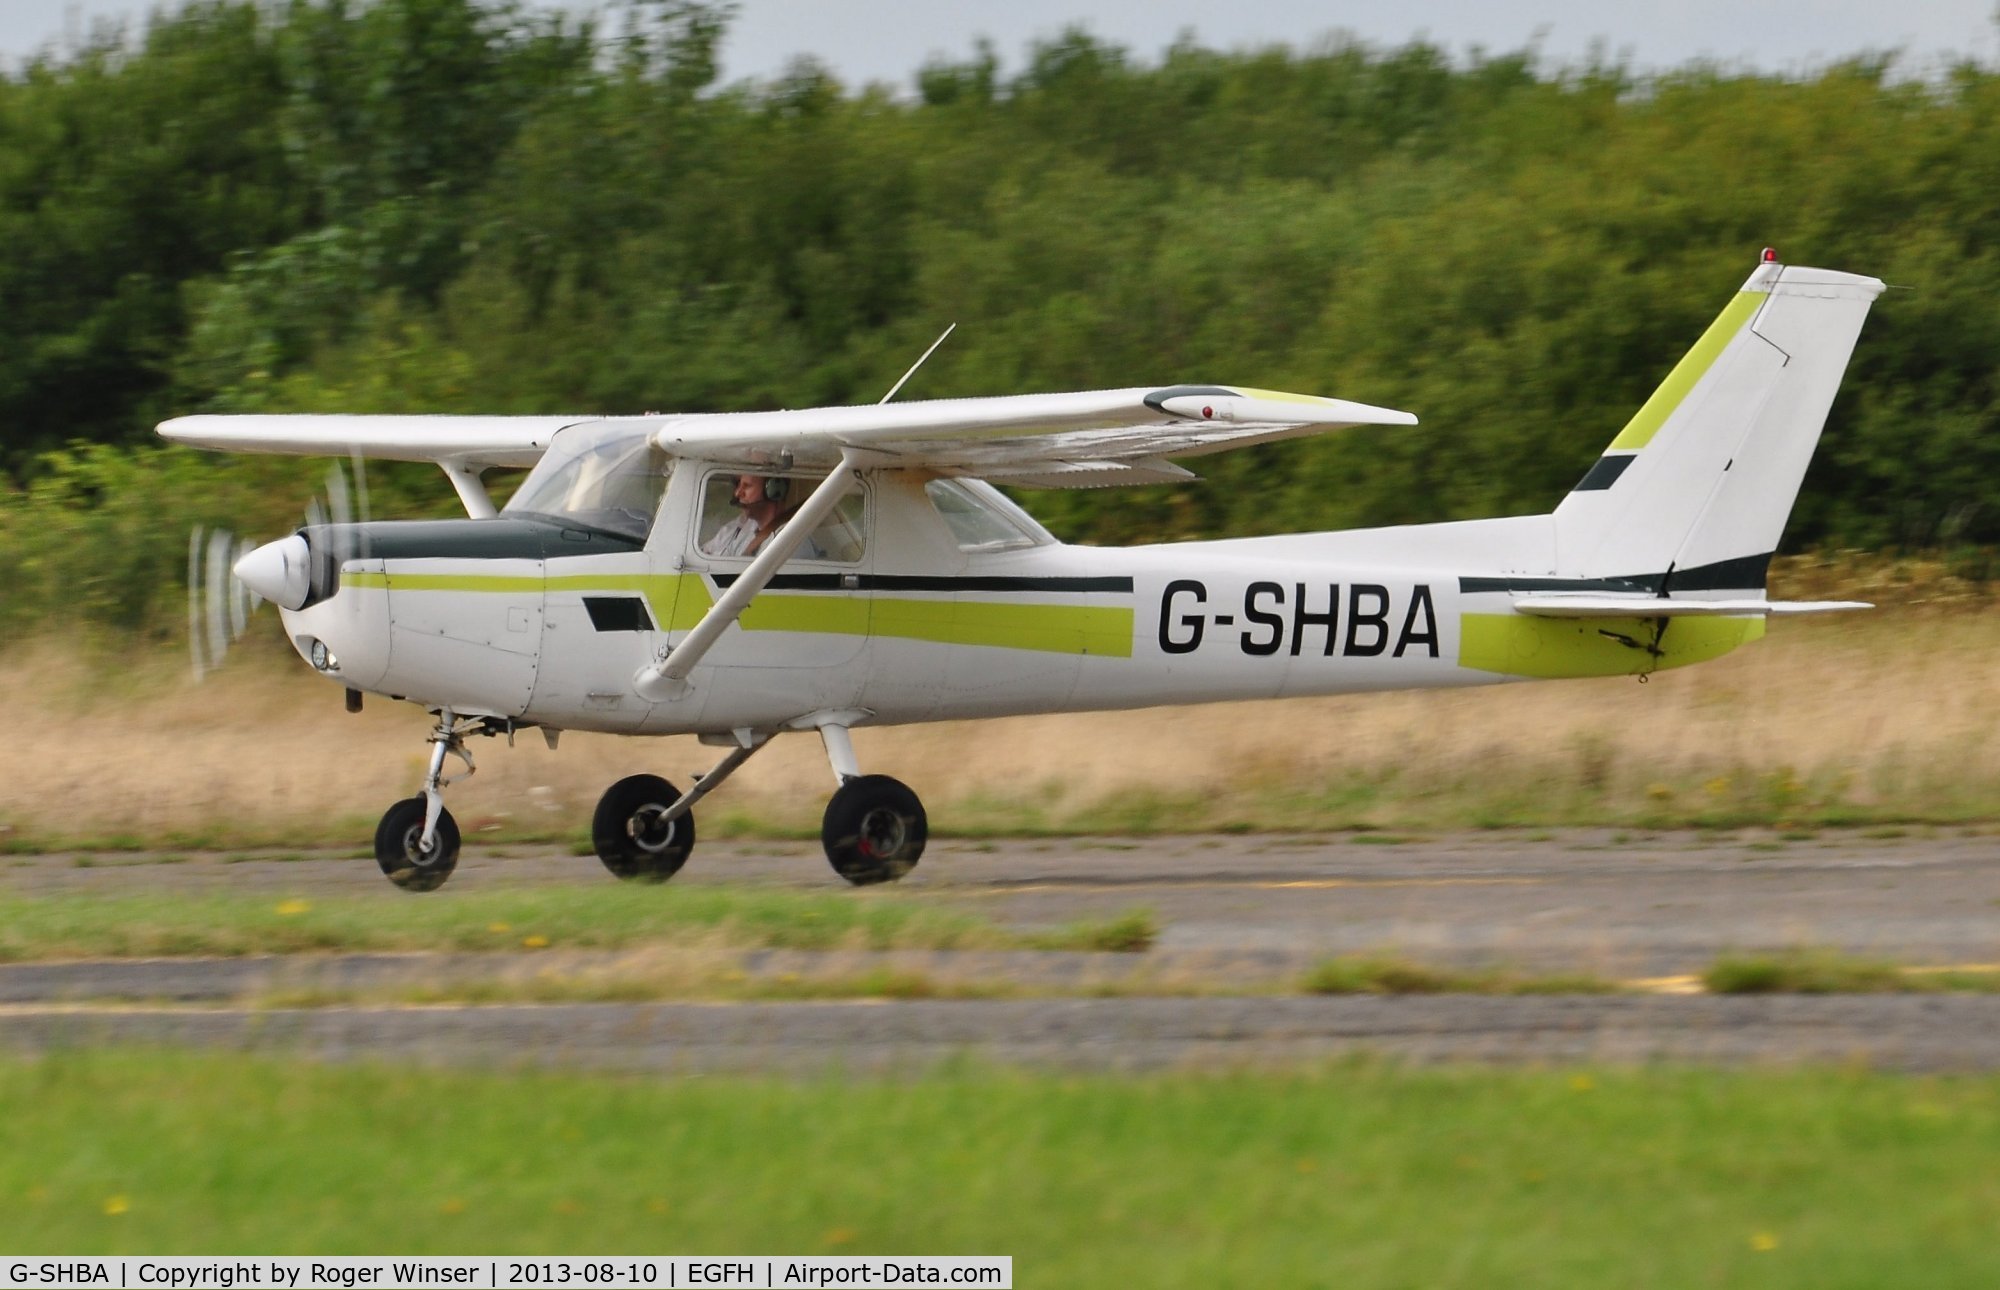 G-SHBA, 1979 Reims F152 II C/N 1570, Visiting Reims Cessna 152. Previously registered OO-SHB.